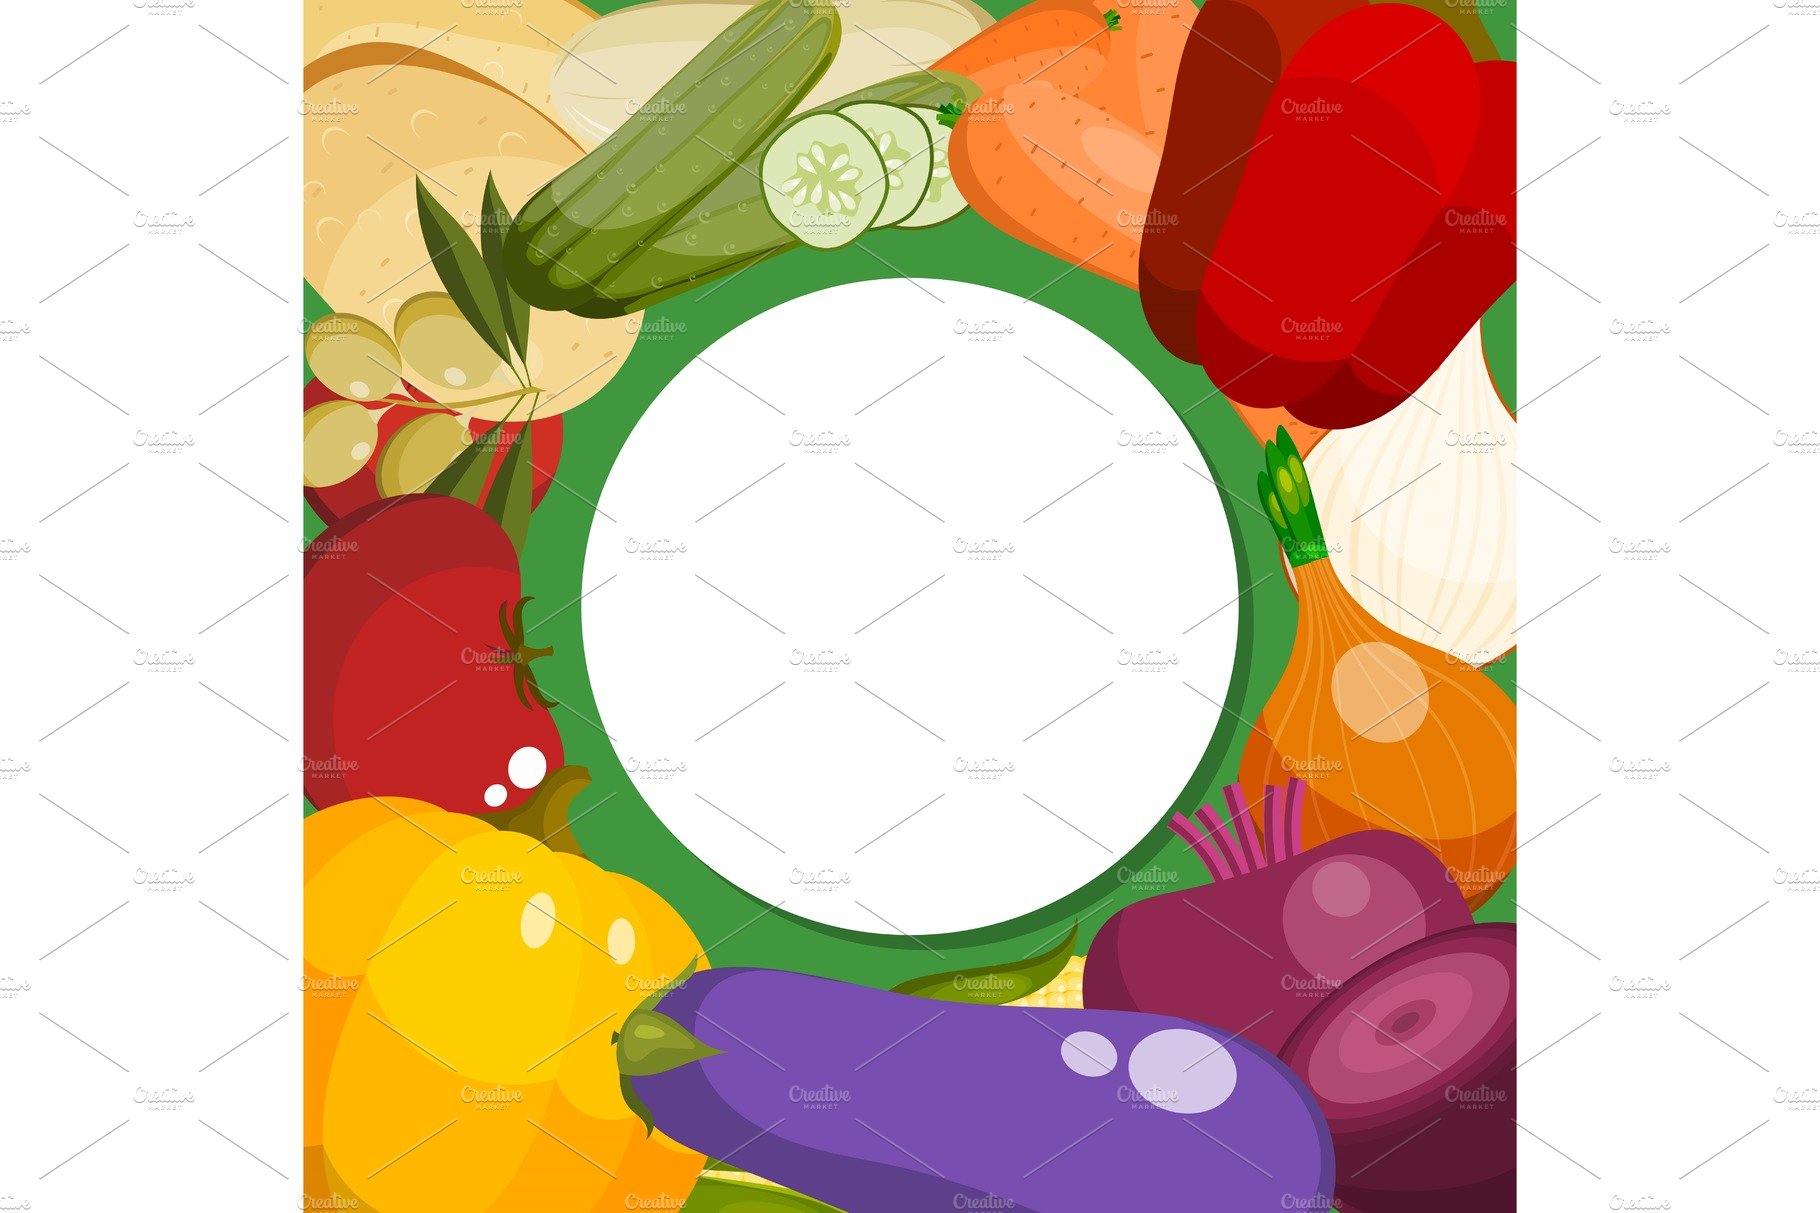 Farm fresh vegetables round pattern cover image.